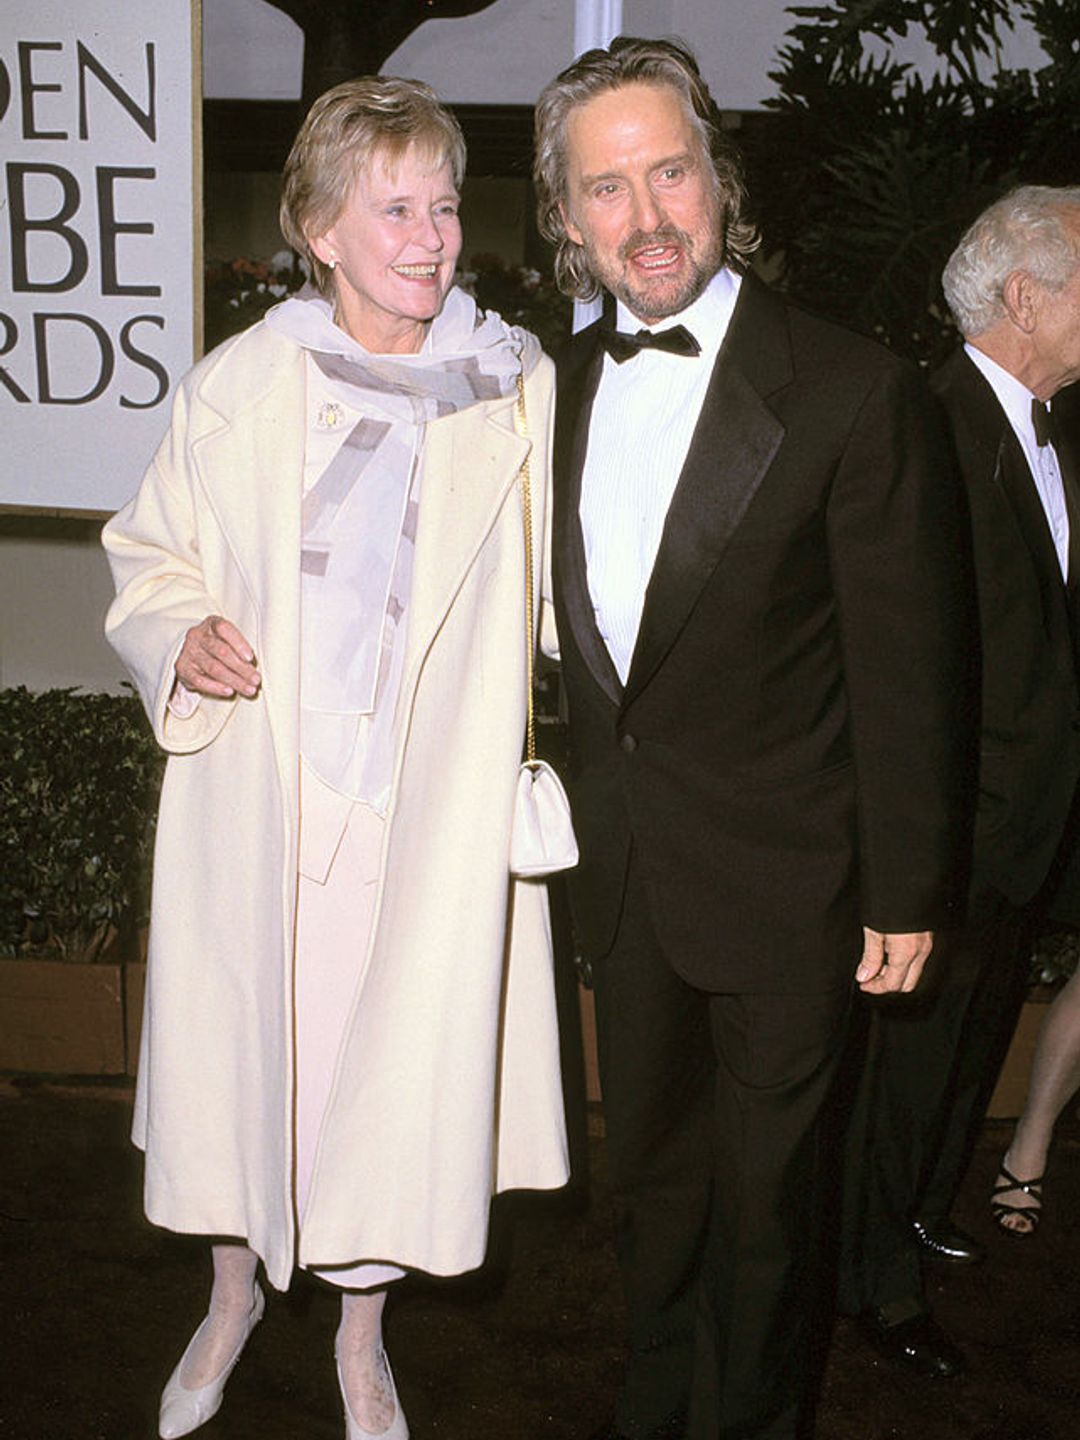 Michael and Diana Douglas at the 53rd Annual Golden Globe Awards